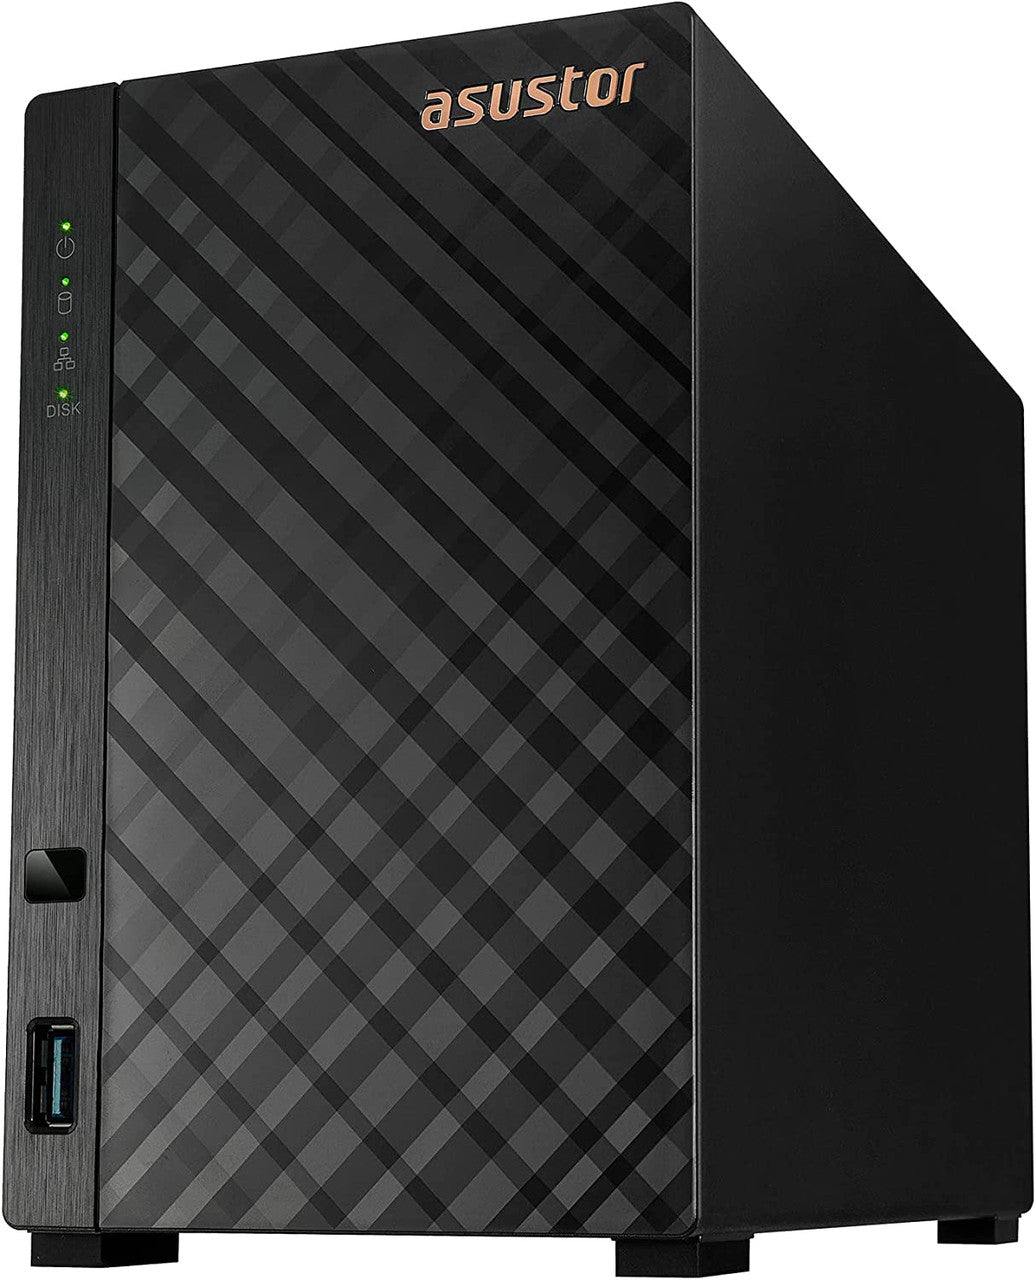 Asustor AS1102T 2-Bay Drivestor 2 NAS with 1GB RAM and 24TB (2x12TB) Seagate Ironwolf PRO Drives